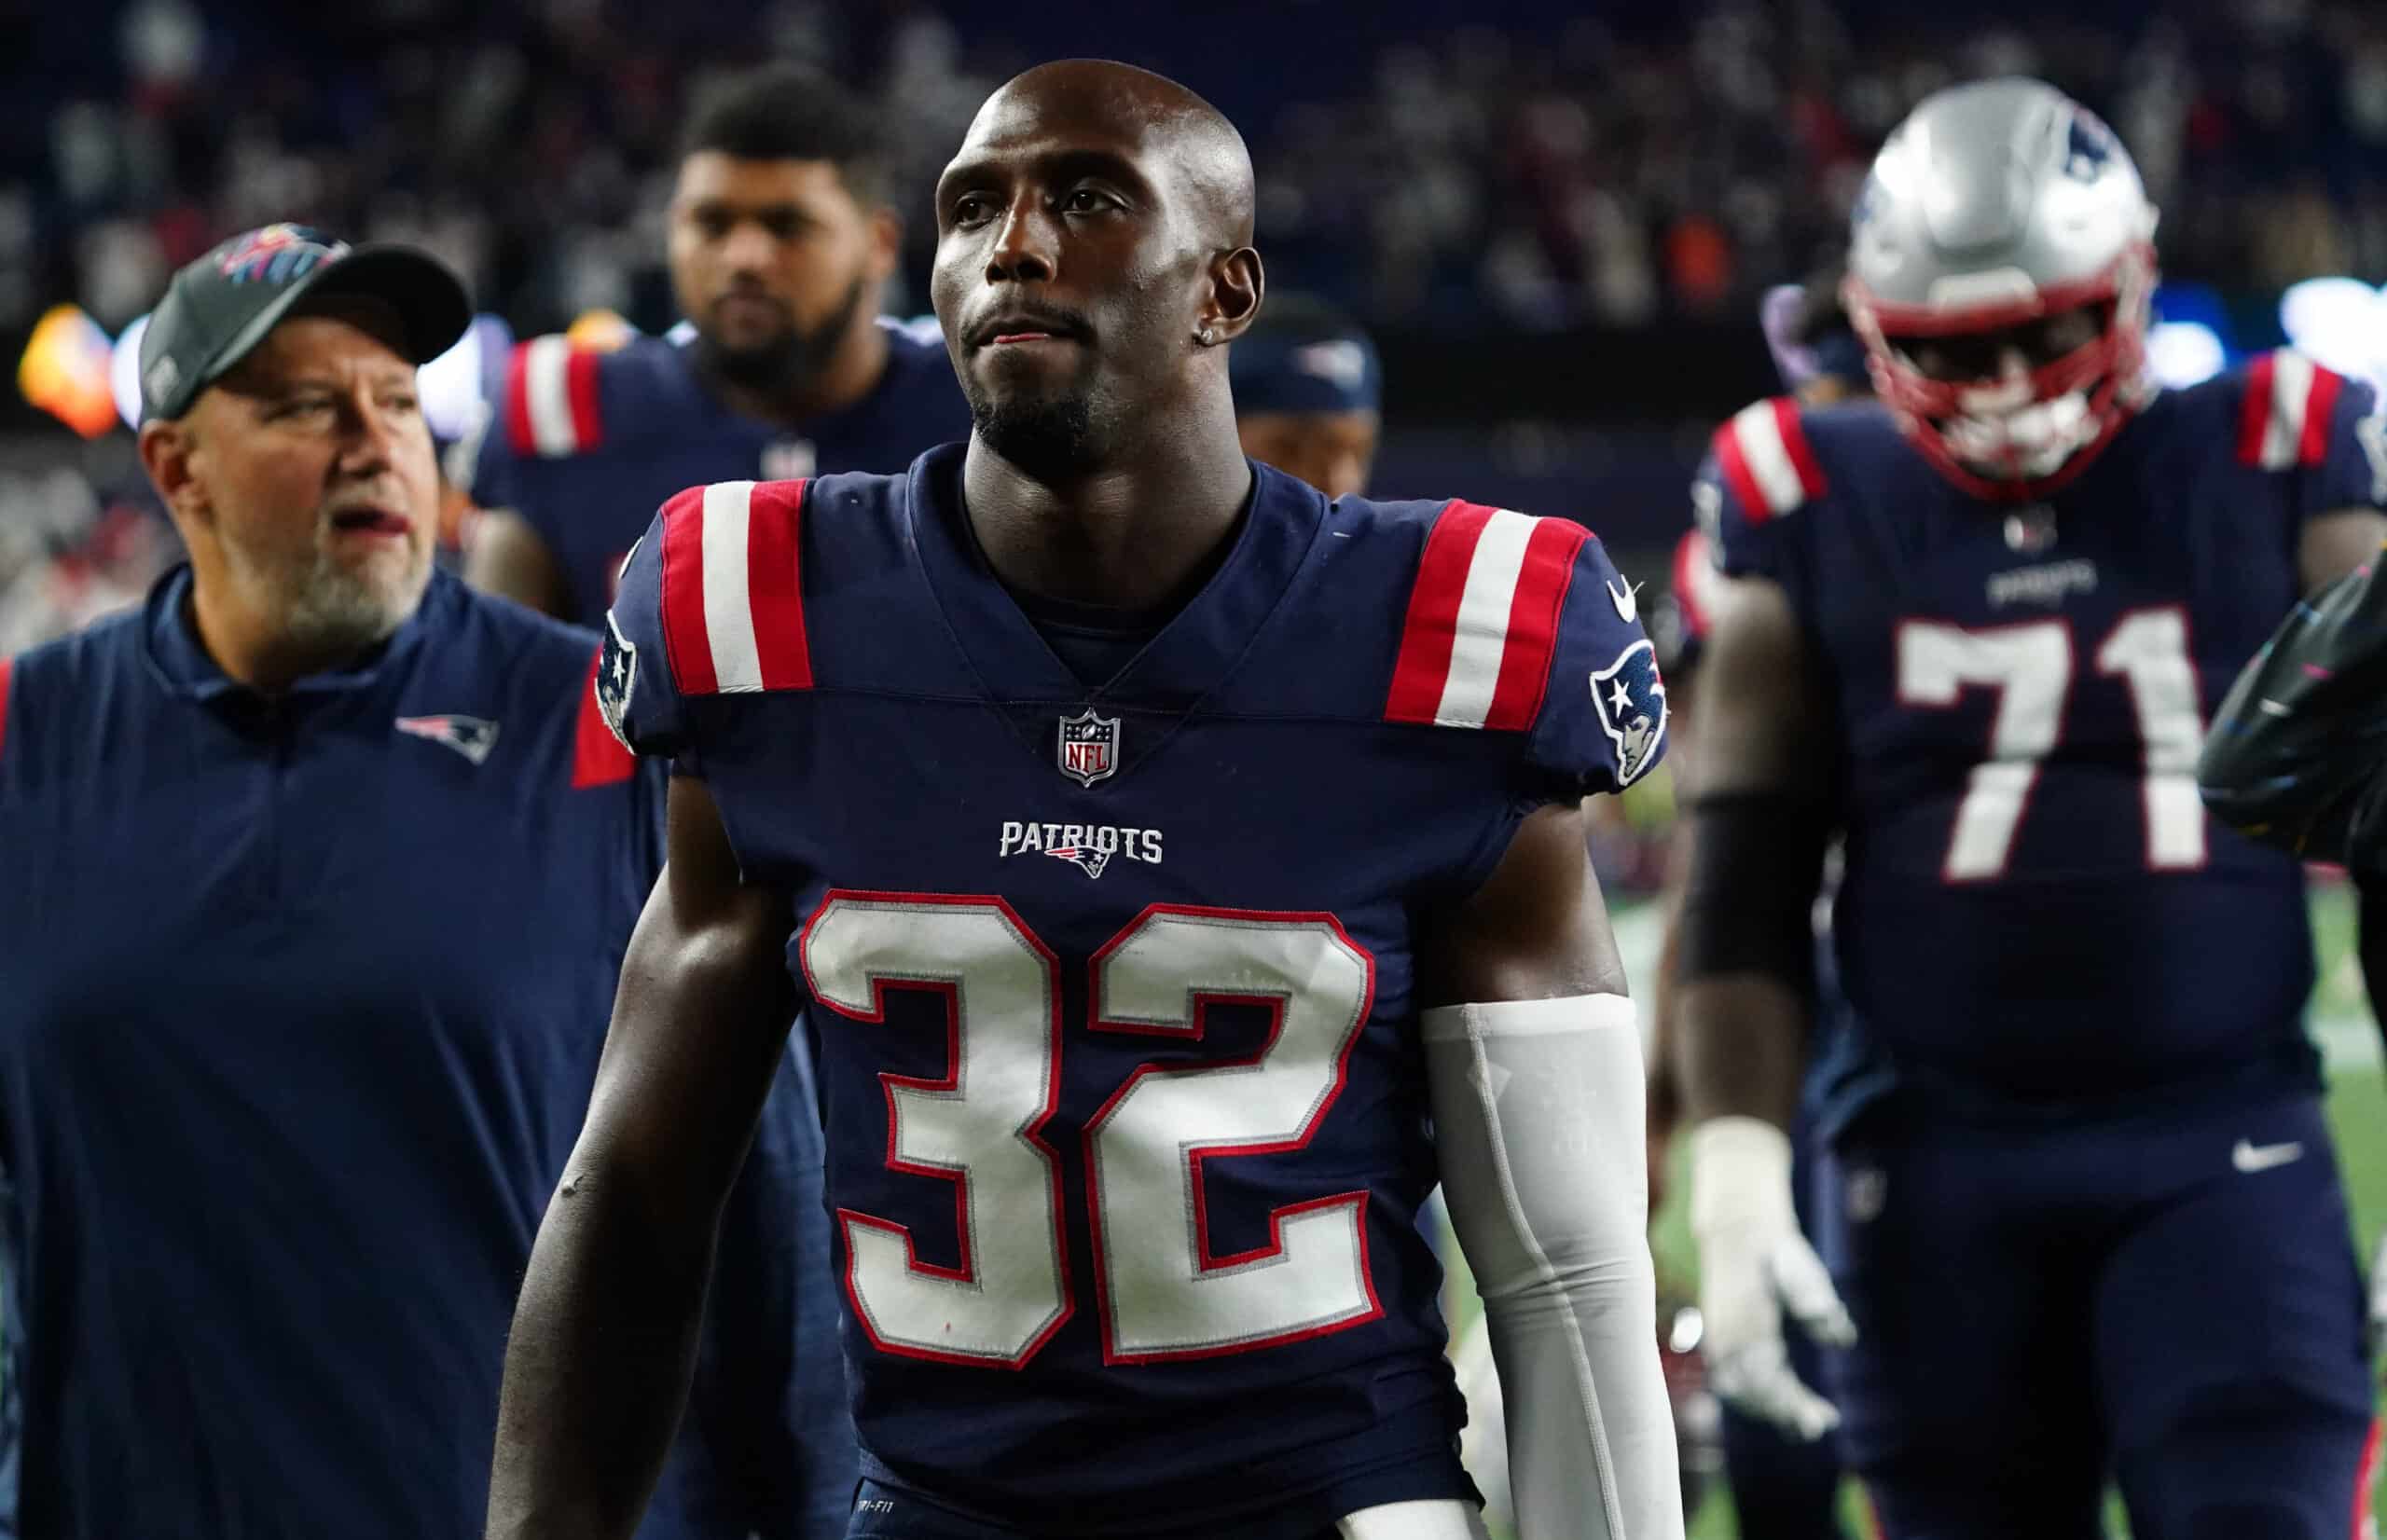 Devin McCourty is joining NBC after 13 NFL seasons.